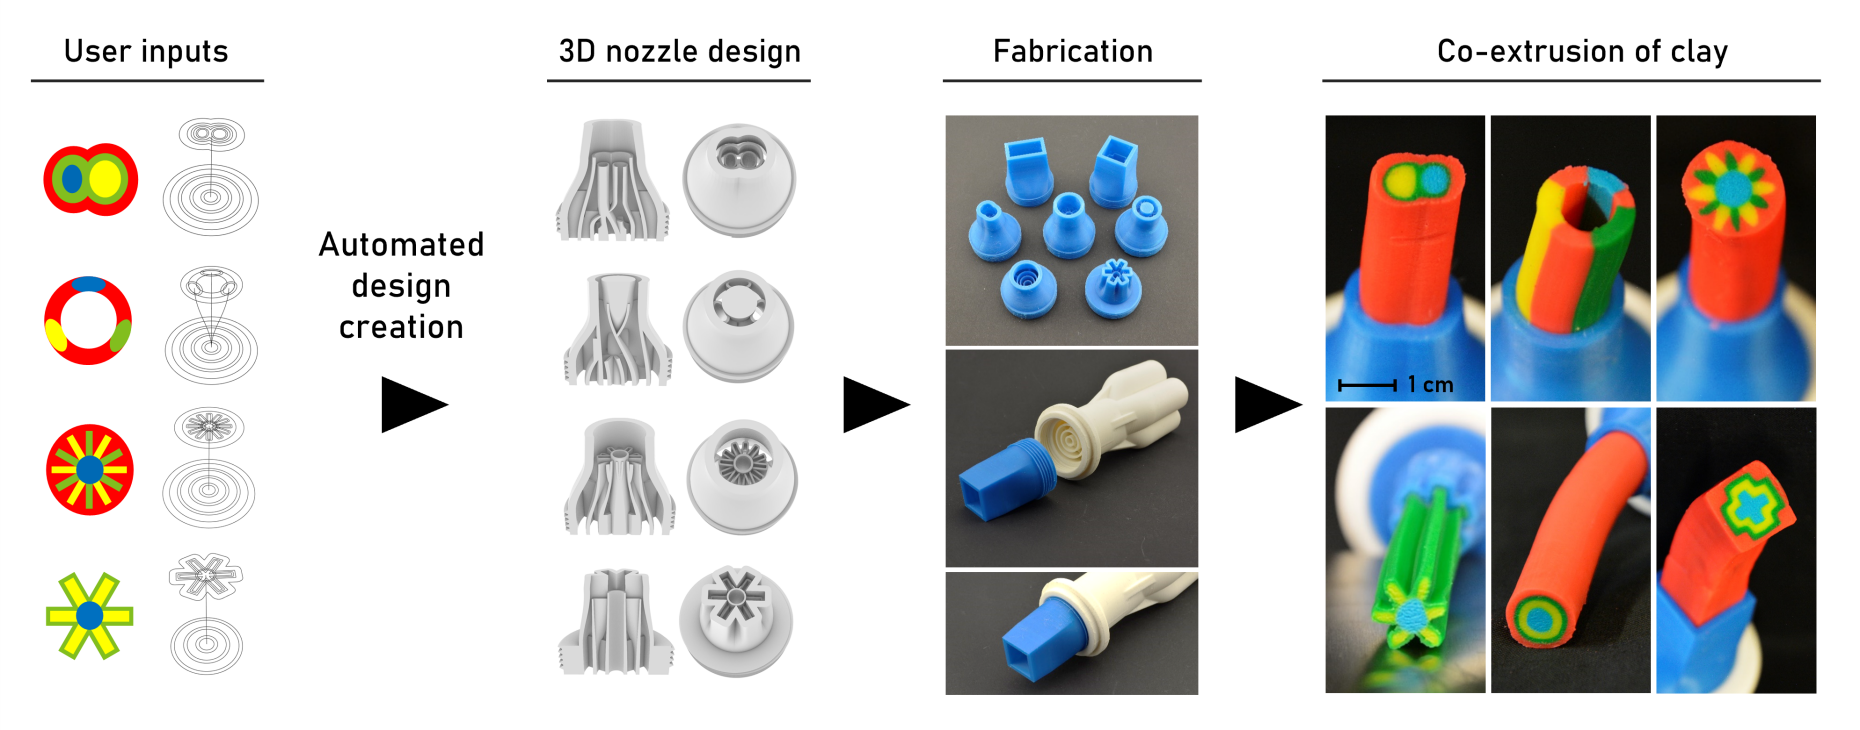 Enlarged view: Additive manufactured nozzles tested using co-extrusion of clay